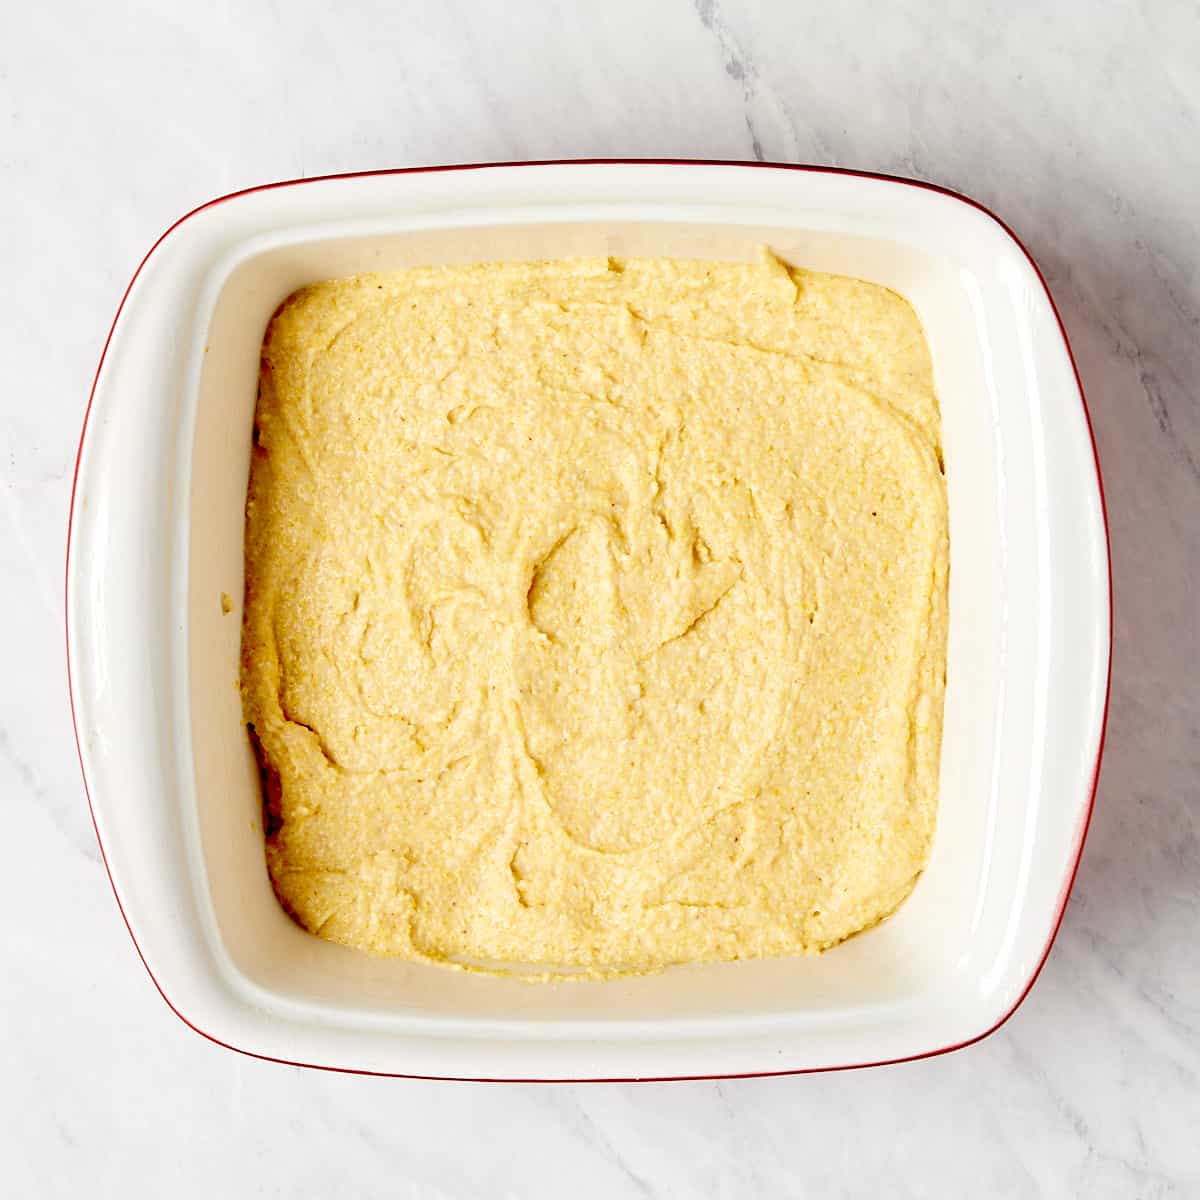 uncooked cornbread in a baking pan